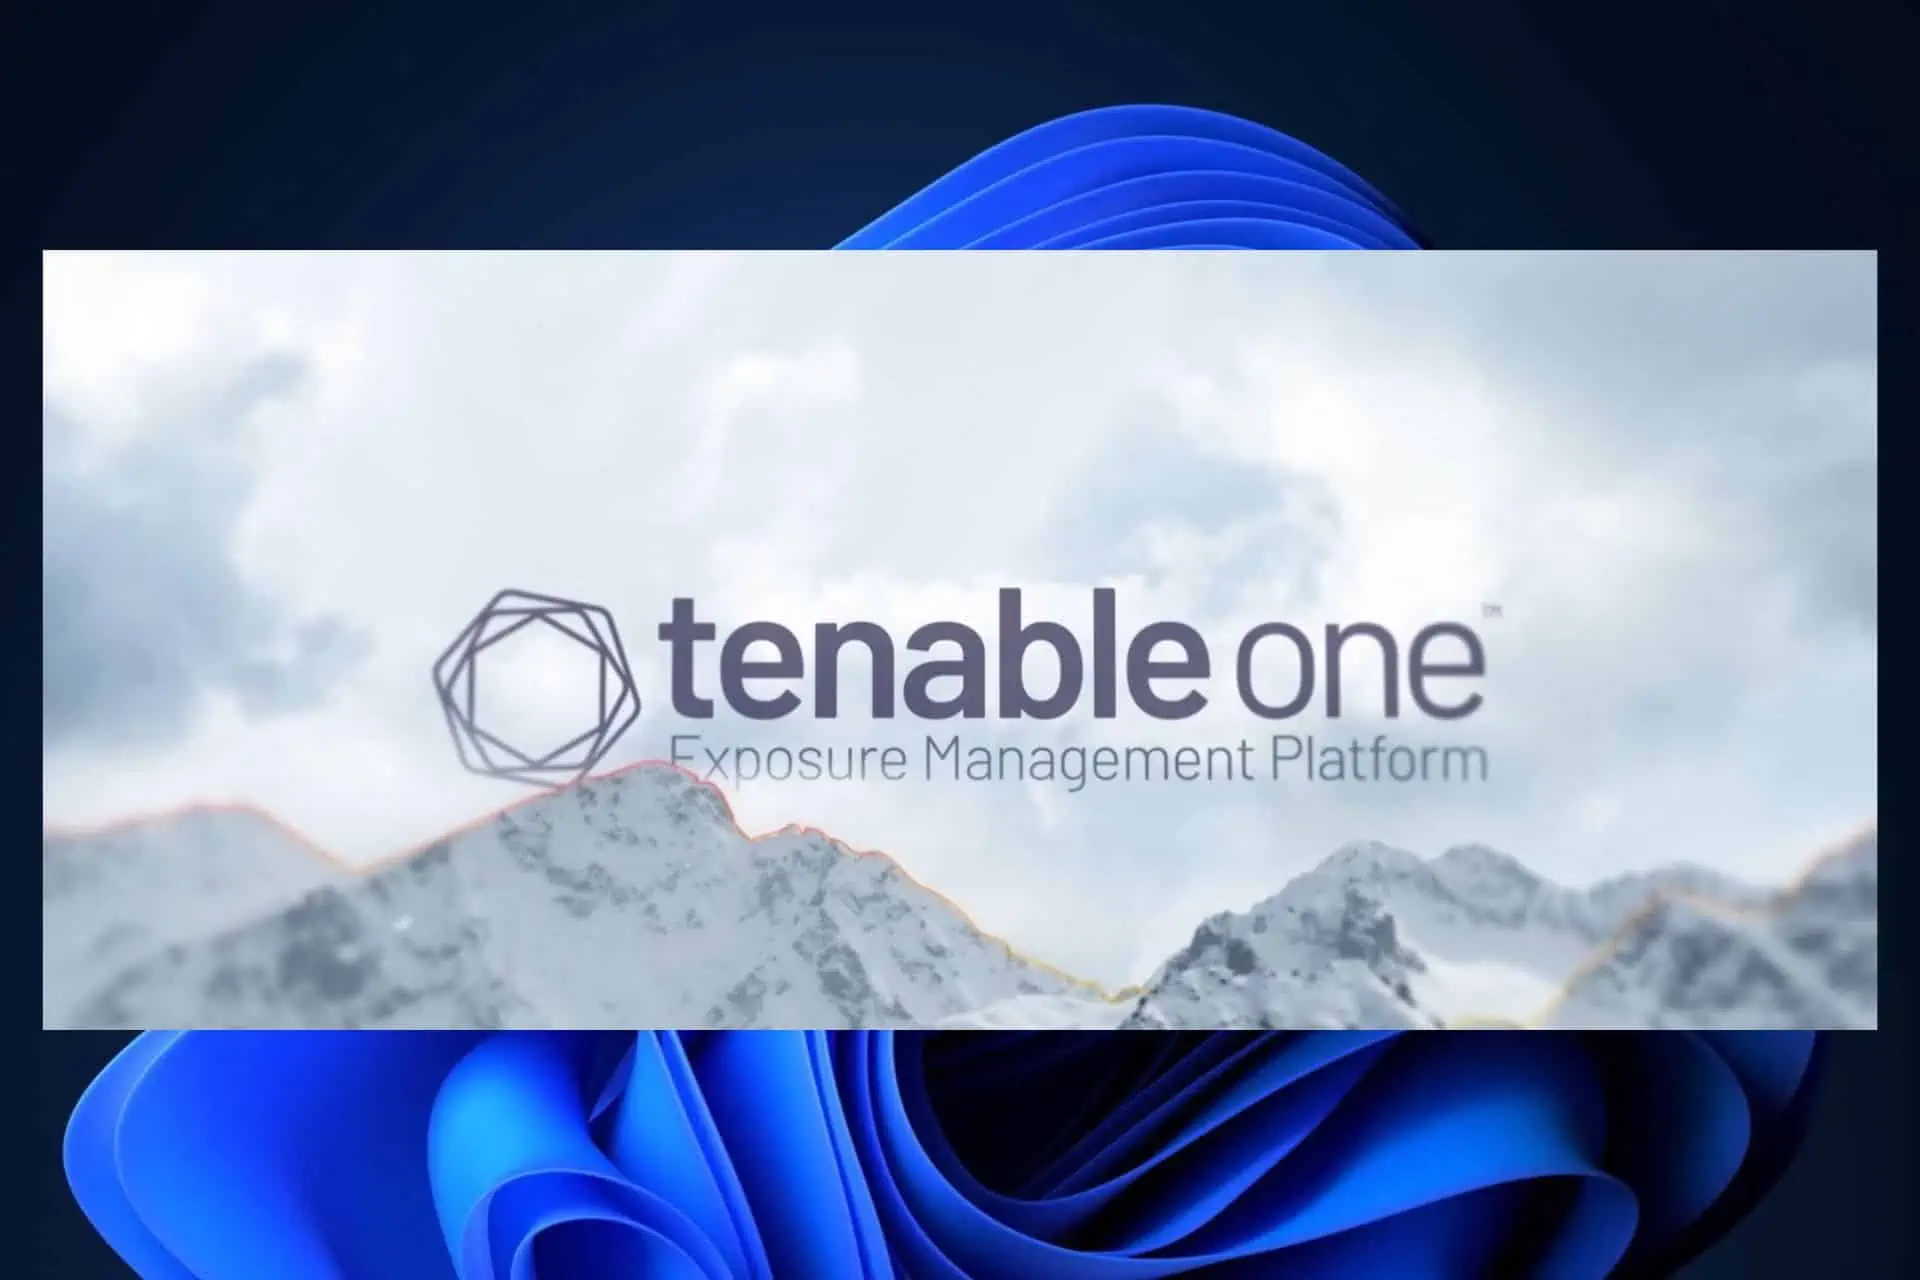 Tenable criticizes Microsoft for being negligent when it comes to security